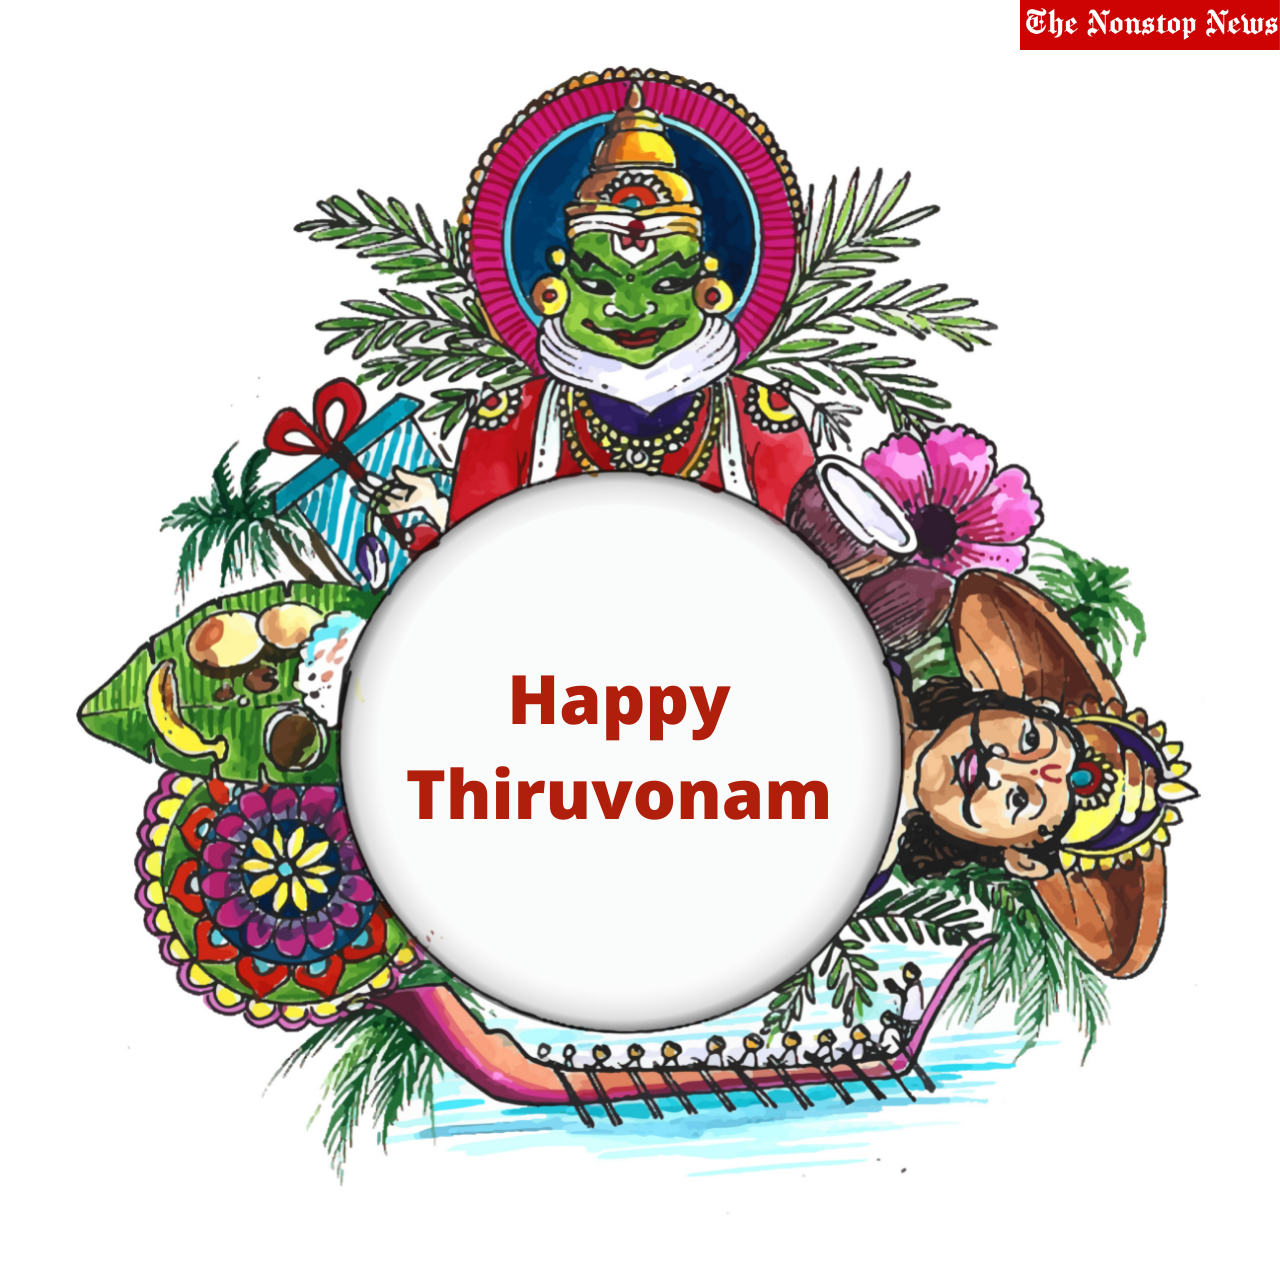 Thiruvonam 2022: Wishes, Quotes, Images, Messages, Greetings, Posters to share